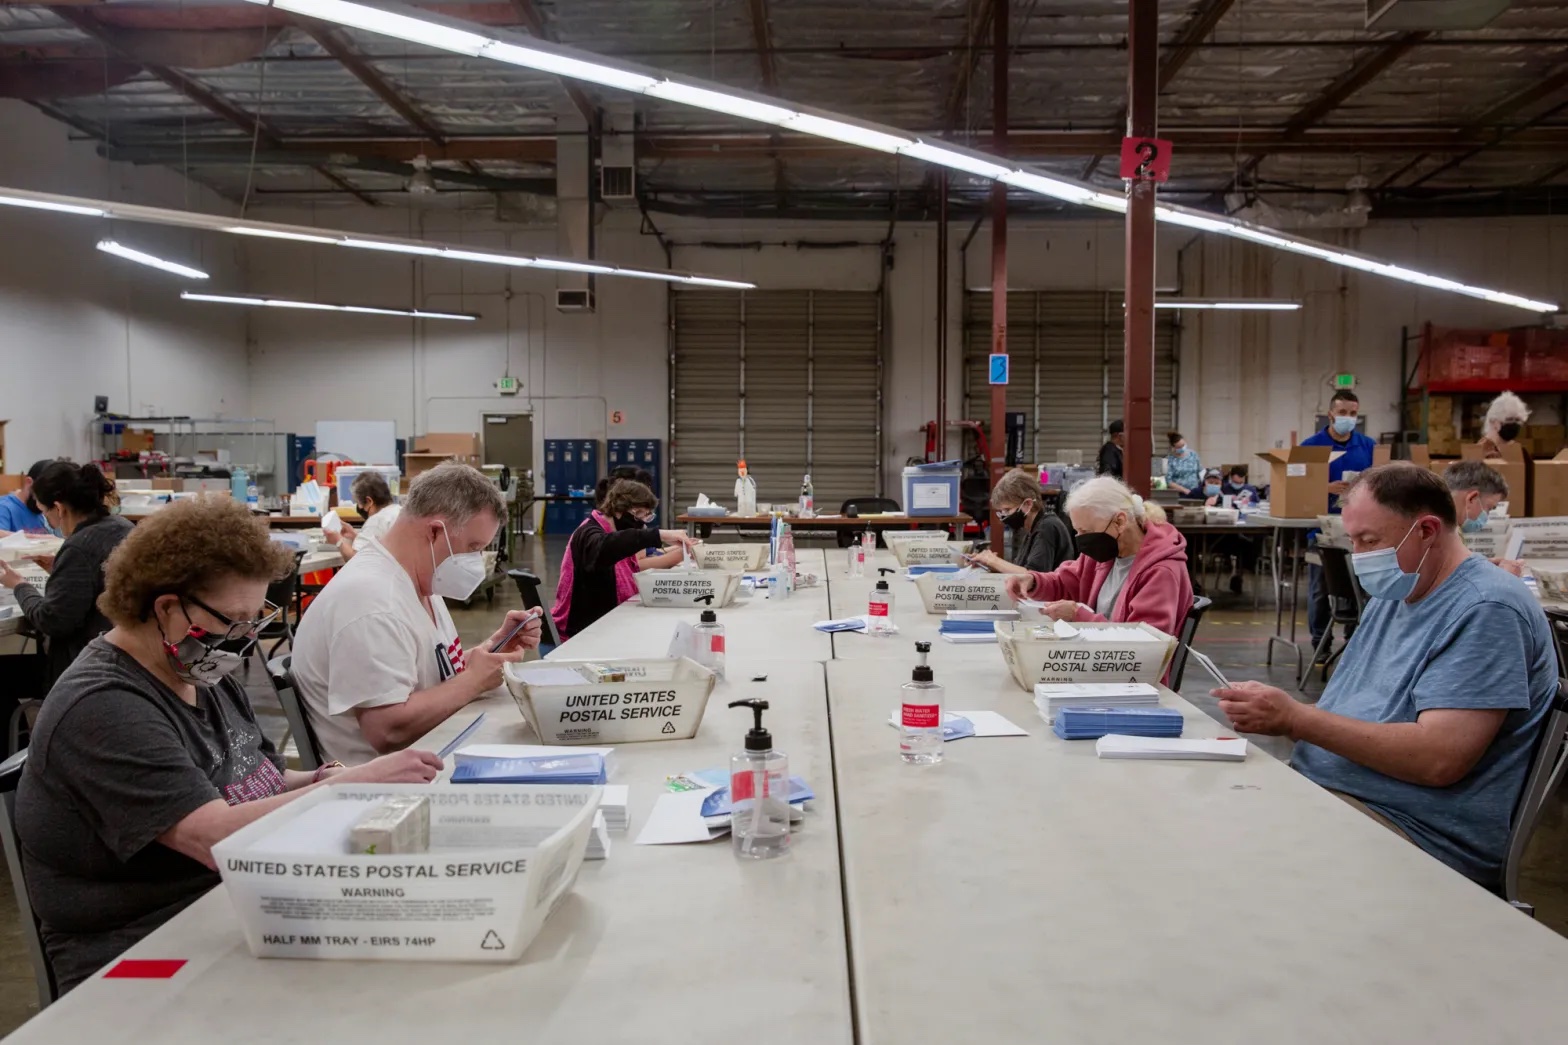 people sit space out at a long folding table in a warehouse, with stacks of envelopes and bins in front of them